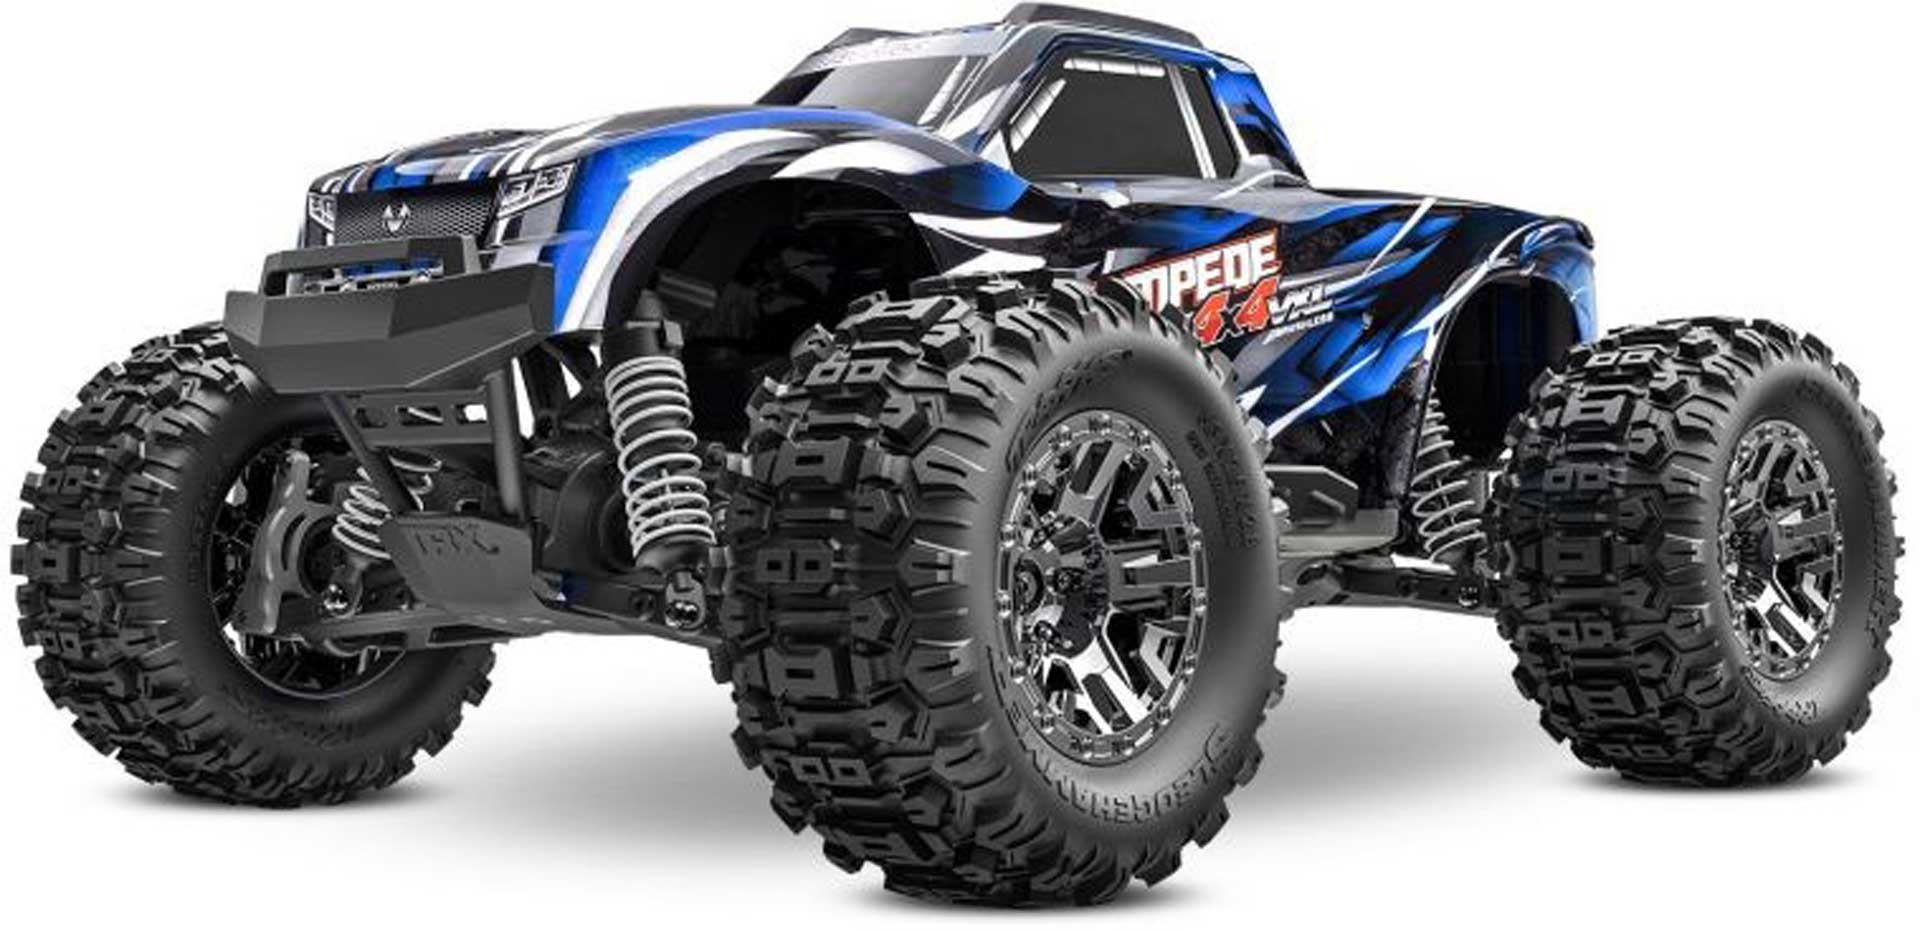 TRAXXAS STAMPEDE 4X4 VXL HD BLEU 1/10 RTR BRUSHLESS MONSTER-TRUCK SANS ACCU NI CHARGEUR, CLIPLESS